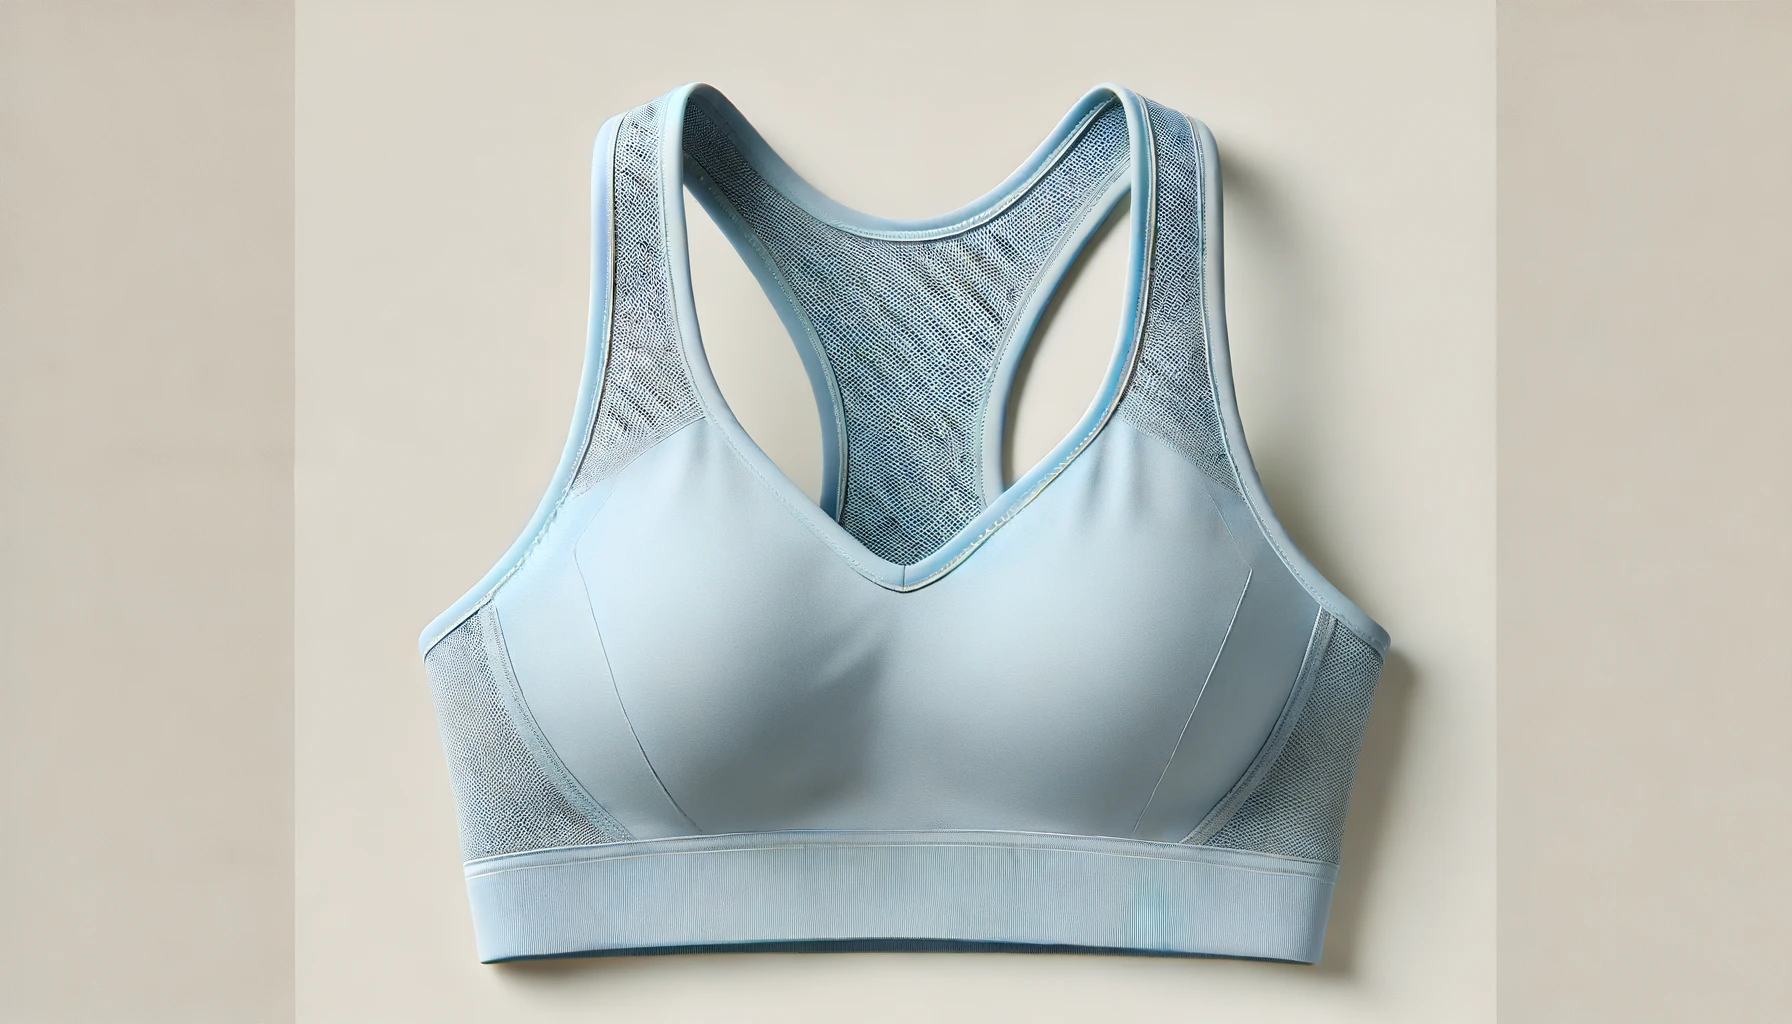 A stylish sports bra similar to the one in the image, in a light blue color, without any logos or text, displayed on a plain background.